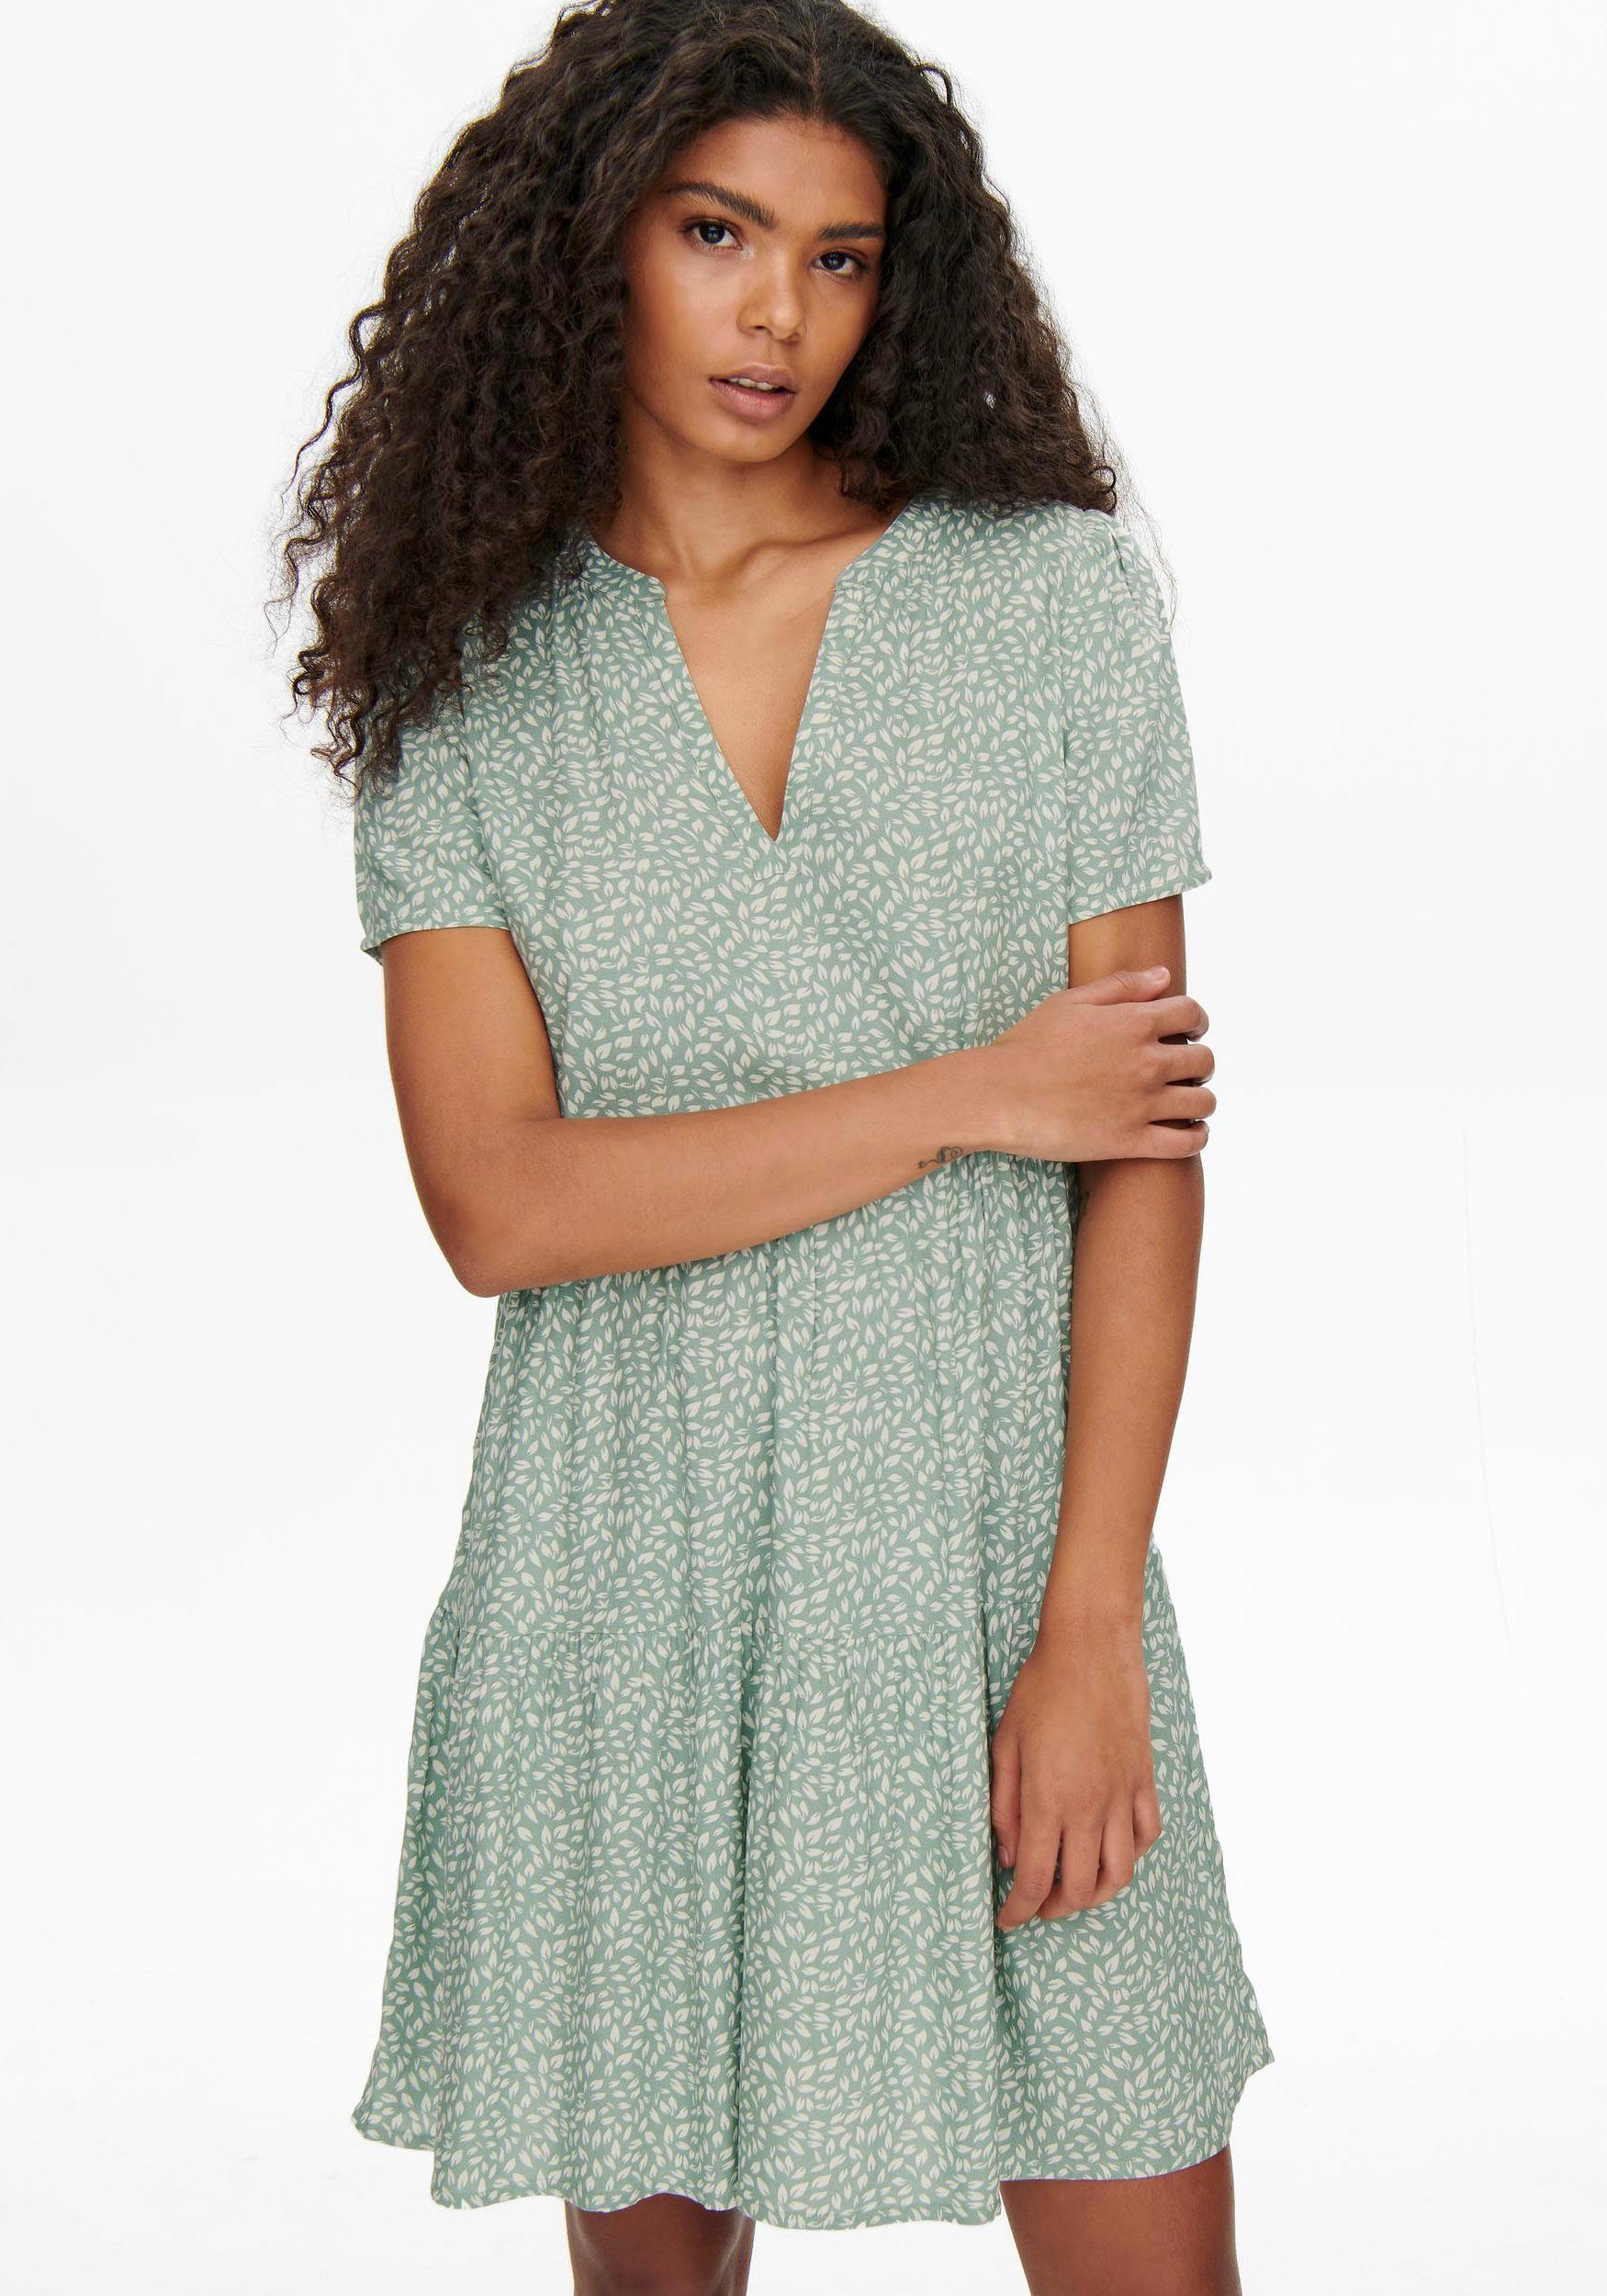 ONLY Sommerkleid ONLZALLY LIFE S/S Green AOP:White NOOS PTM leafs DRESS THEA Chinois